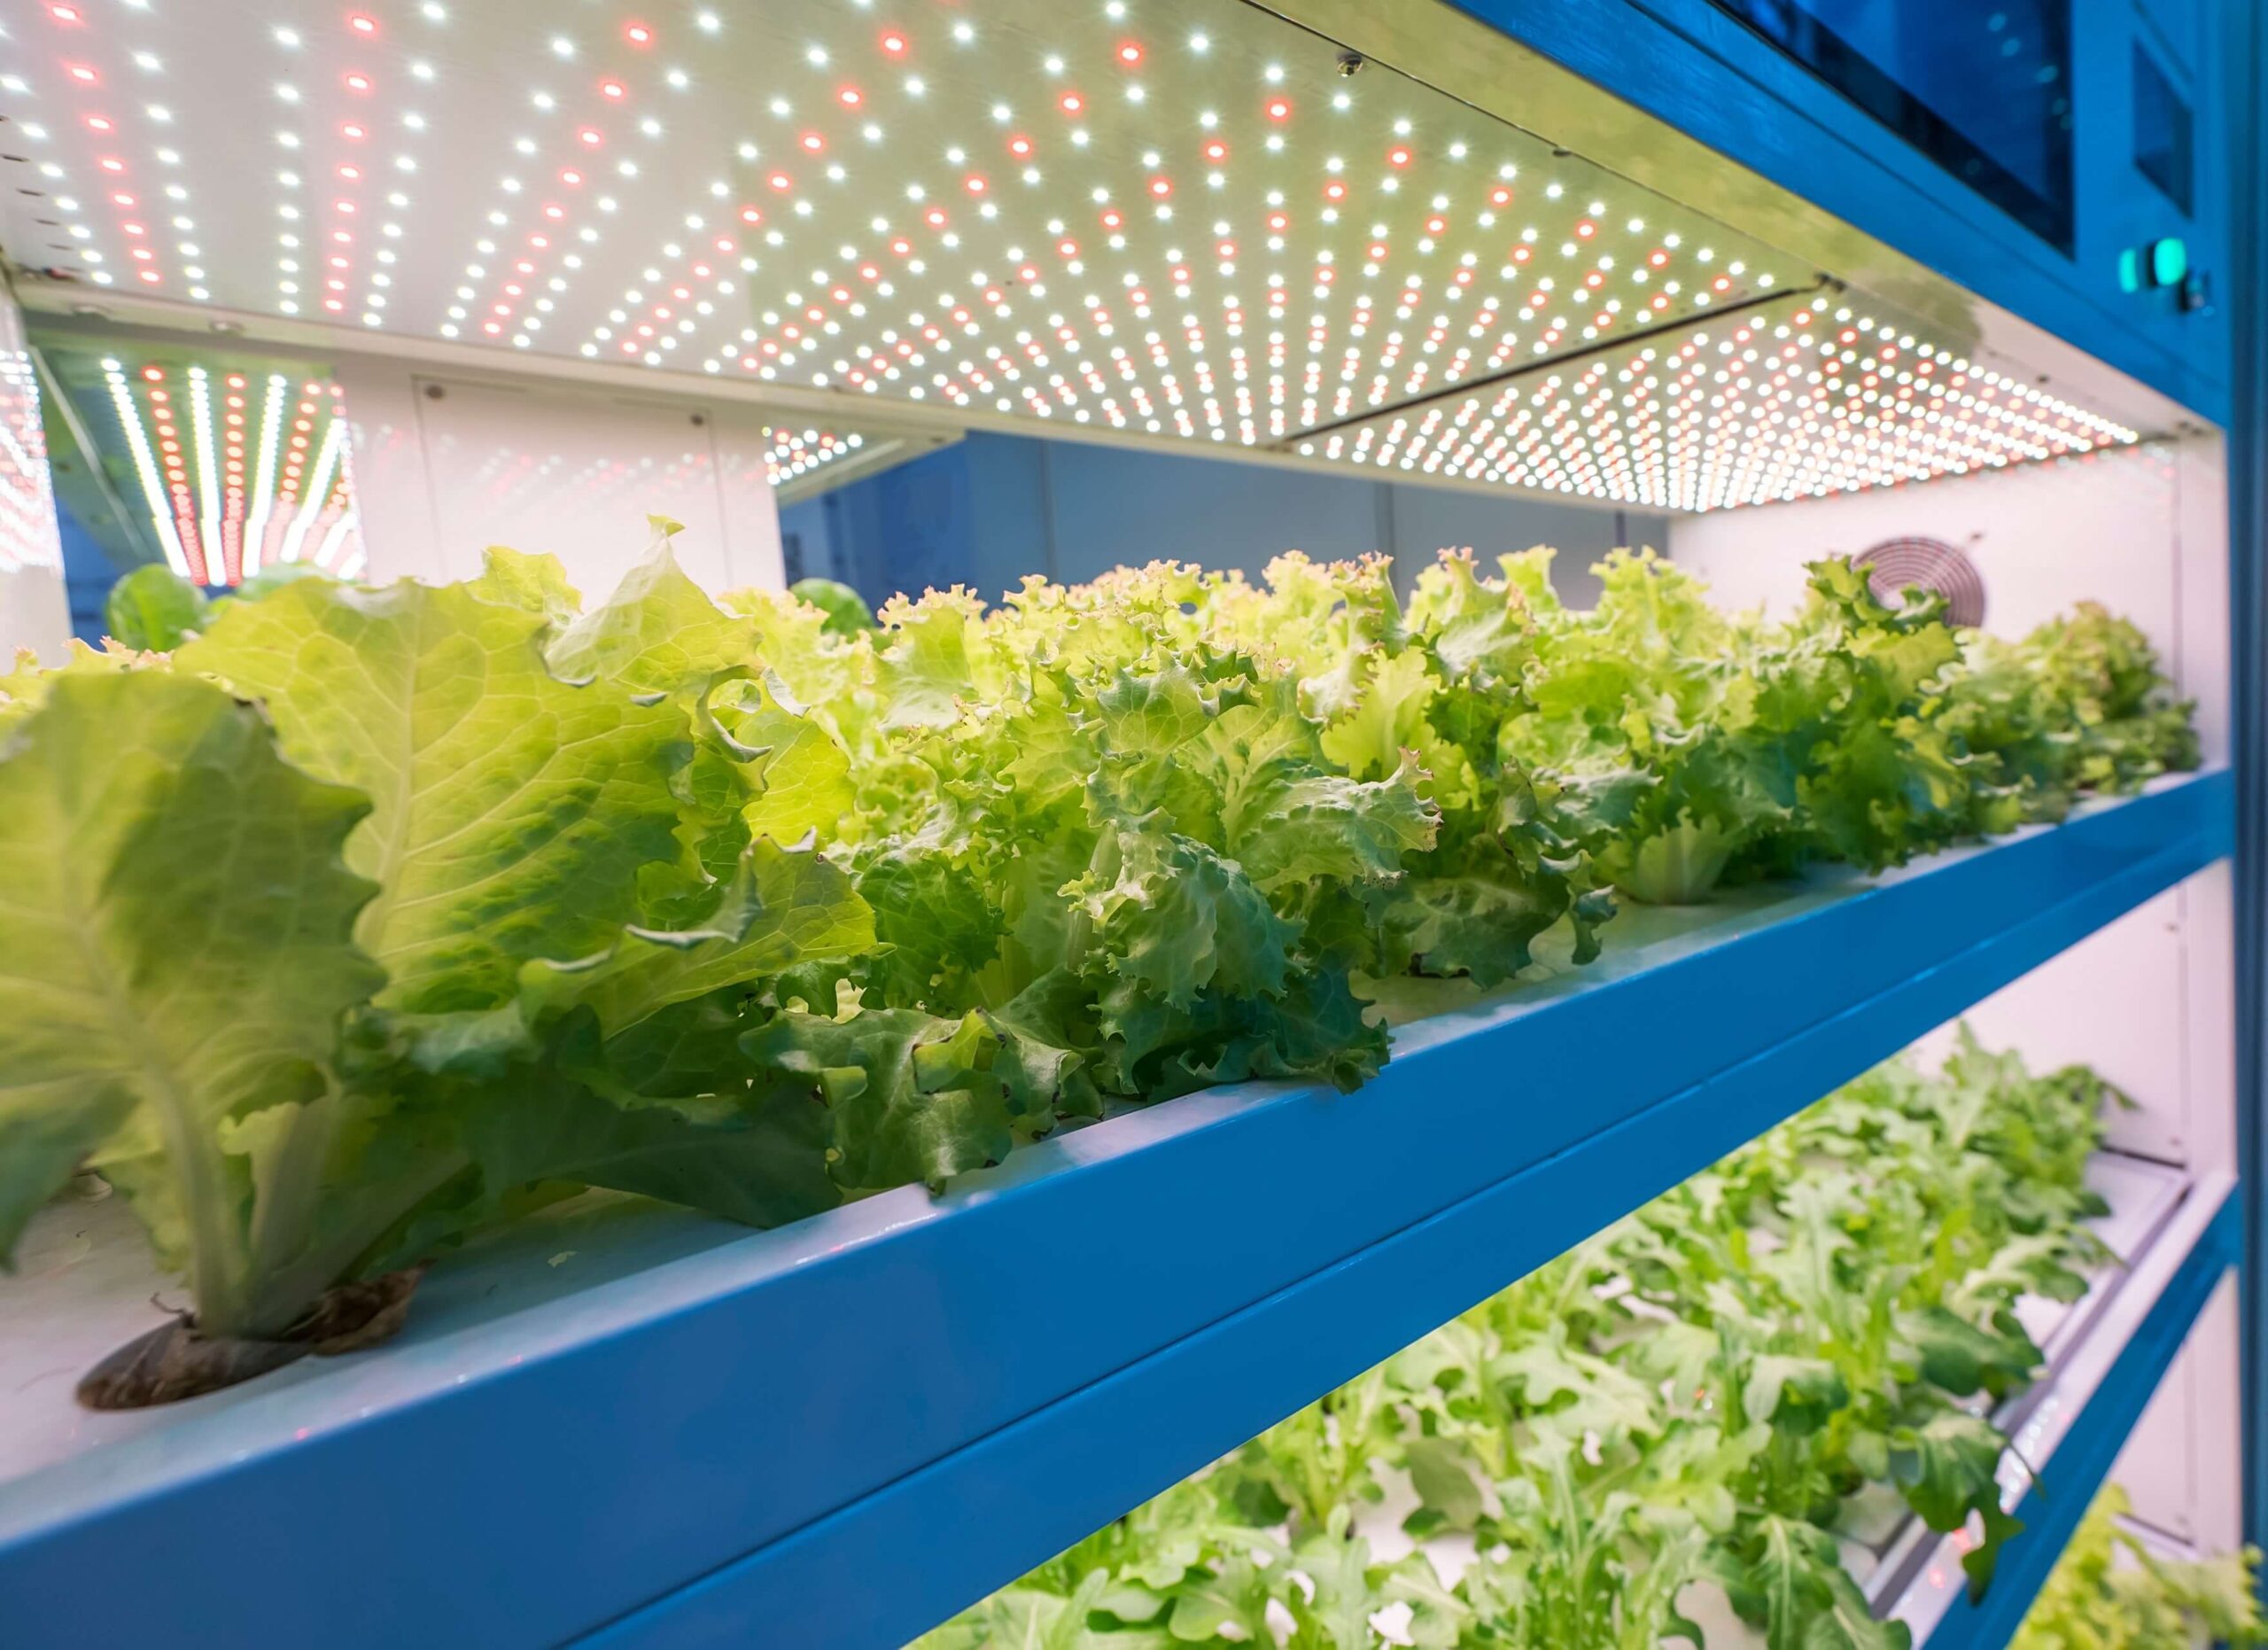 What Are Major Benefits Of LED Grow Lights In Horticulture?